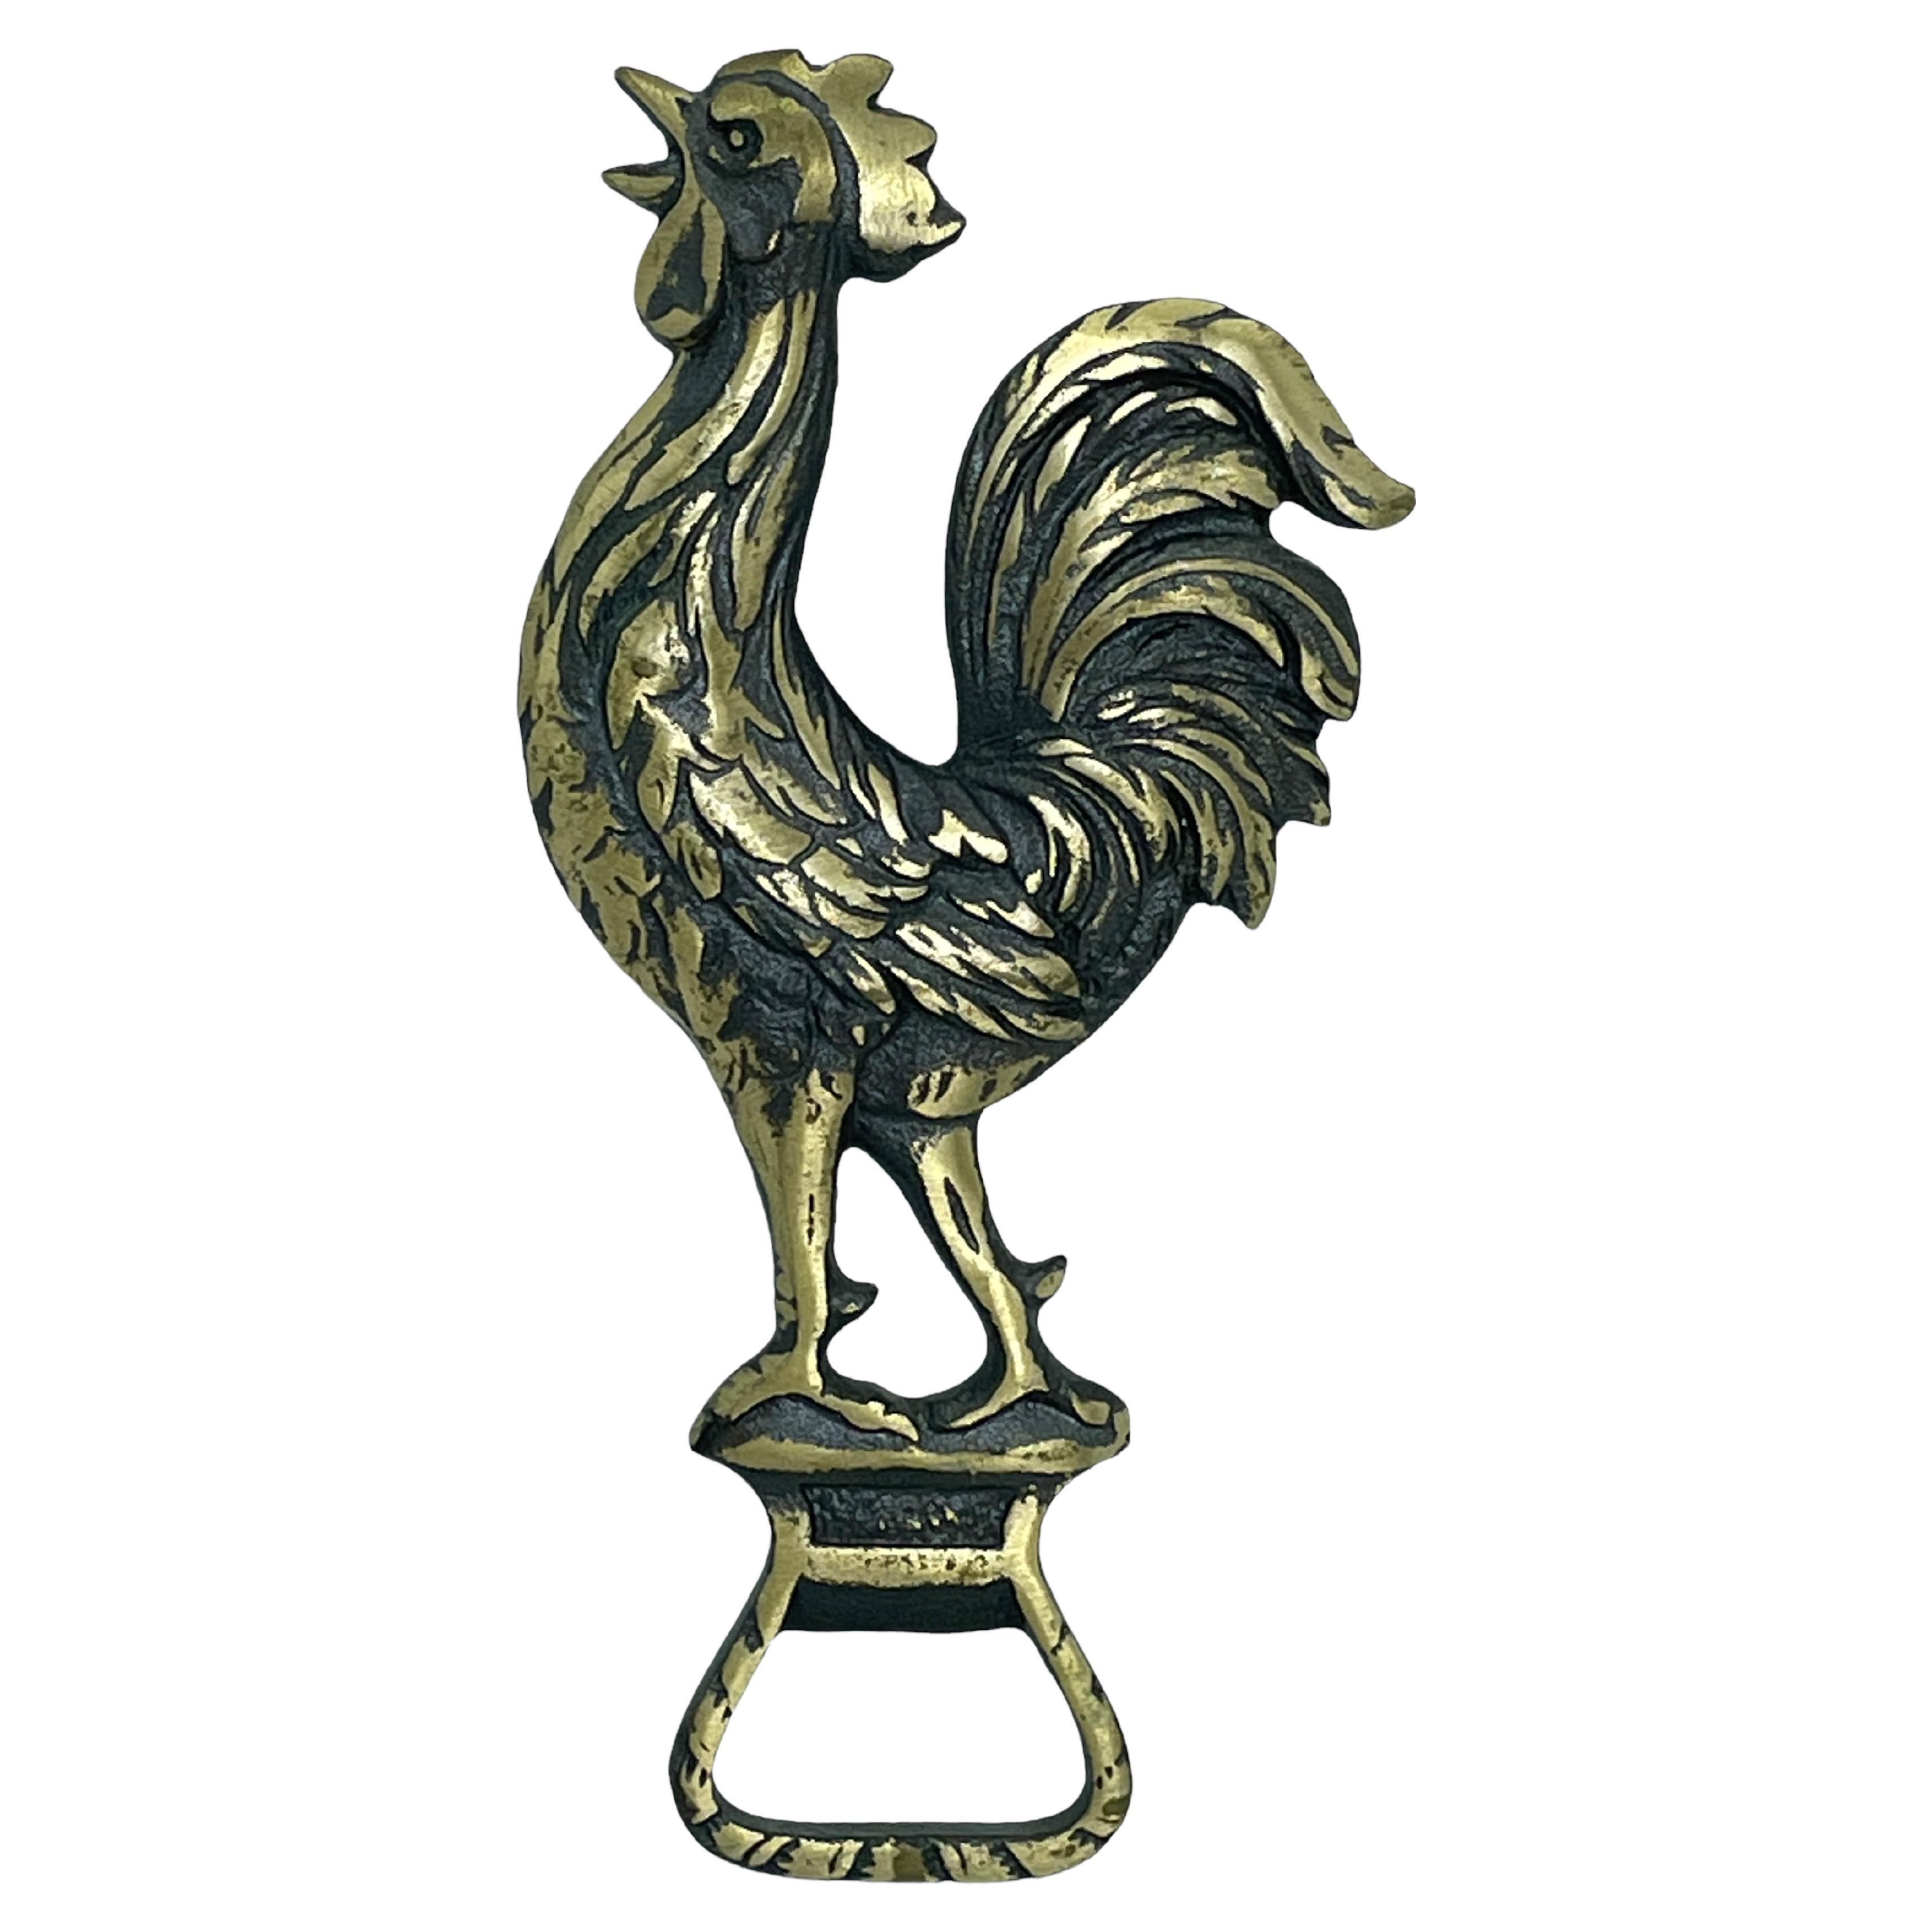 Rooster Vintage Bottle Opener Silver Plate Metal Breweriana Barware by Valenti For Sale